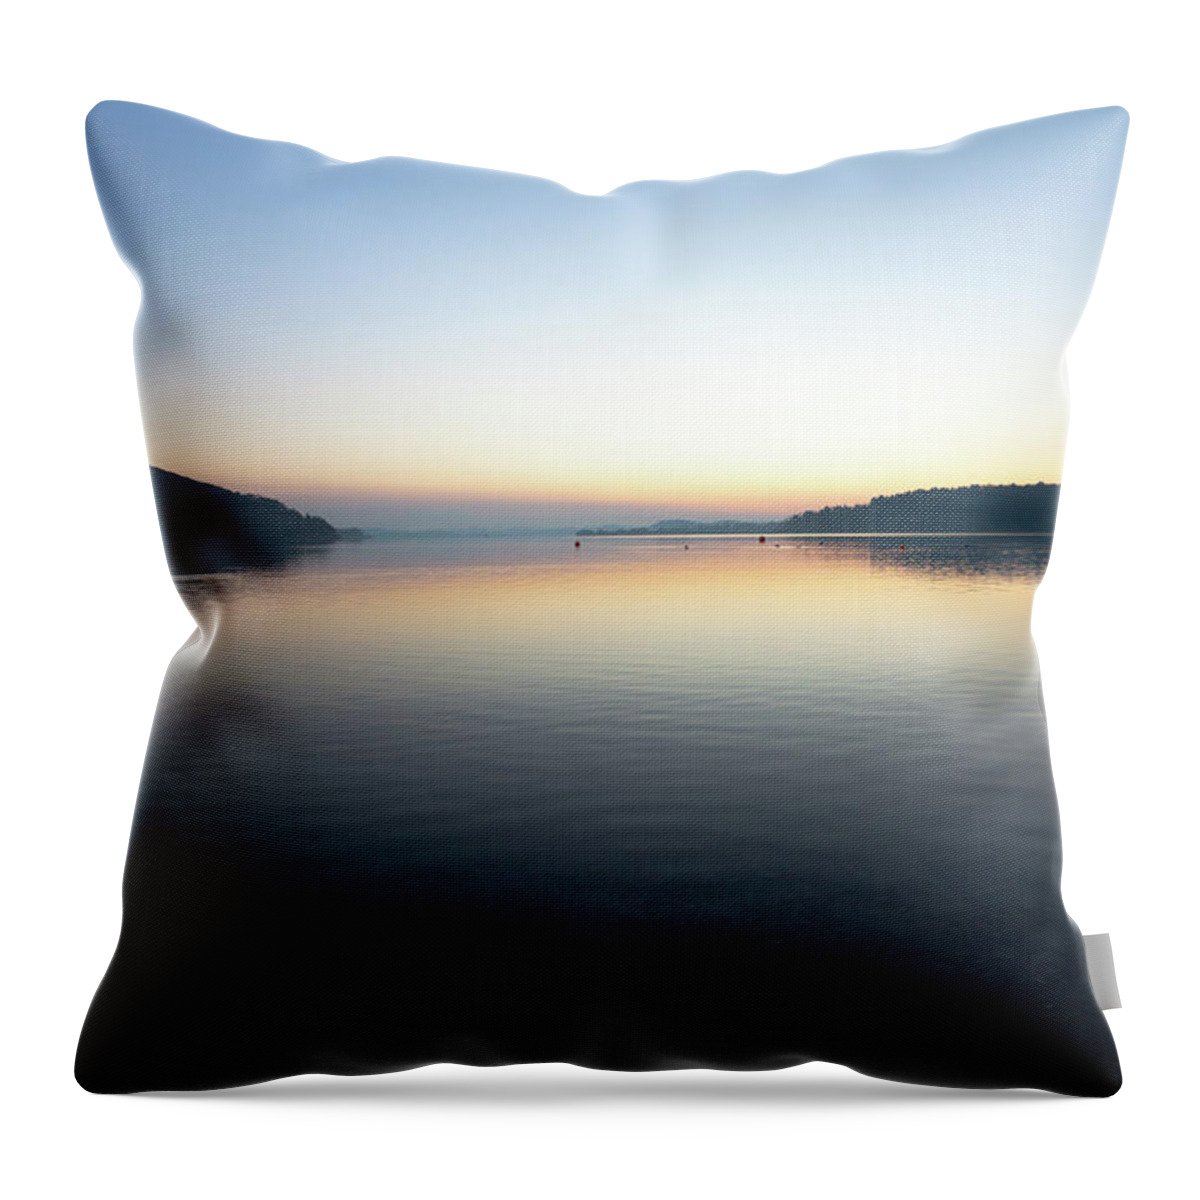 21st Century Throw Pillow featuring the photograph Lake by Phototiger